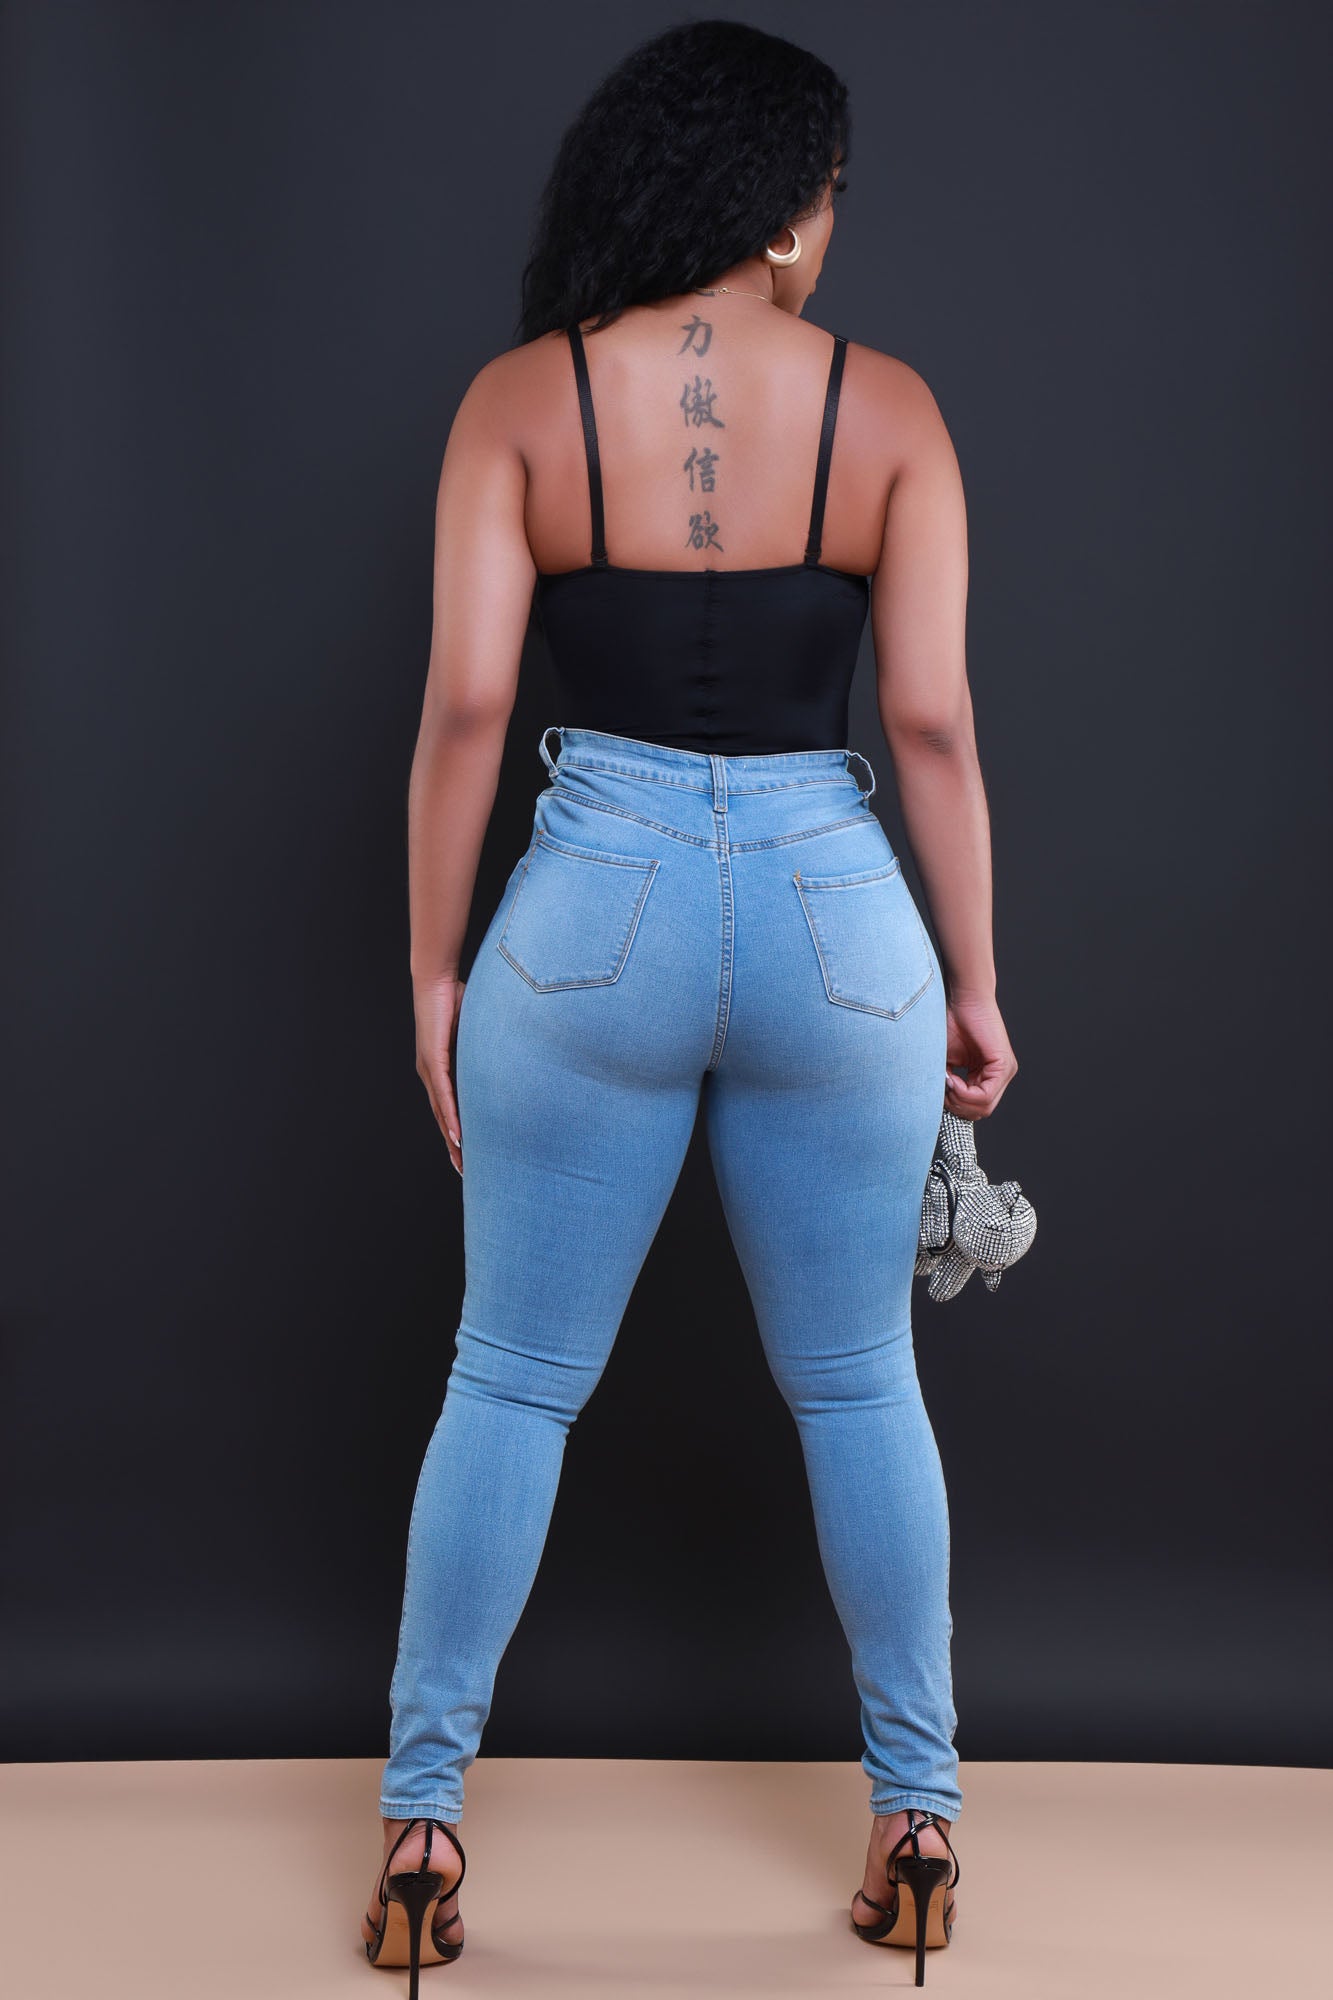 blackgirlmagic  Body suit outfits, Lace bodysuit outfit, Bodysuit and jeans